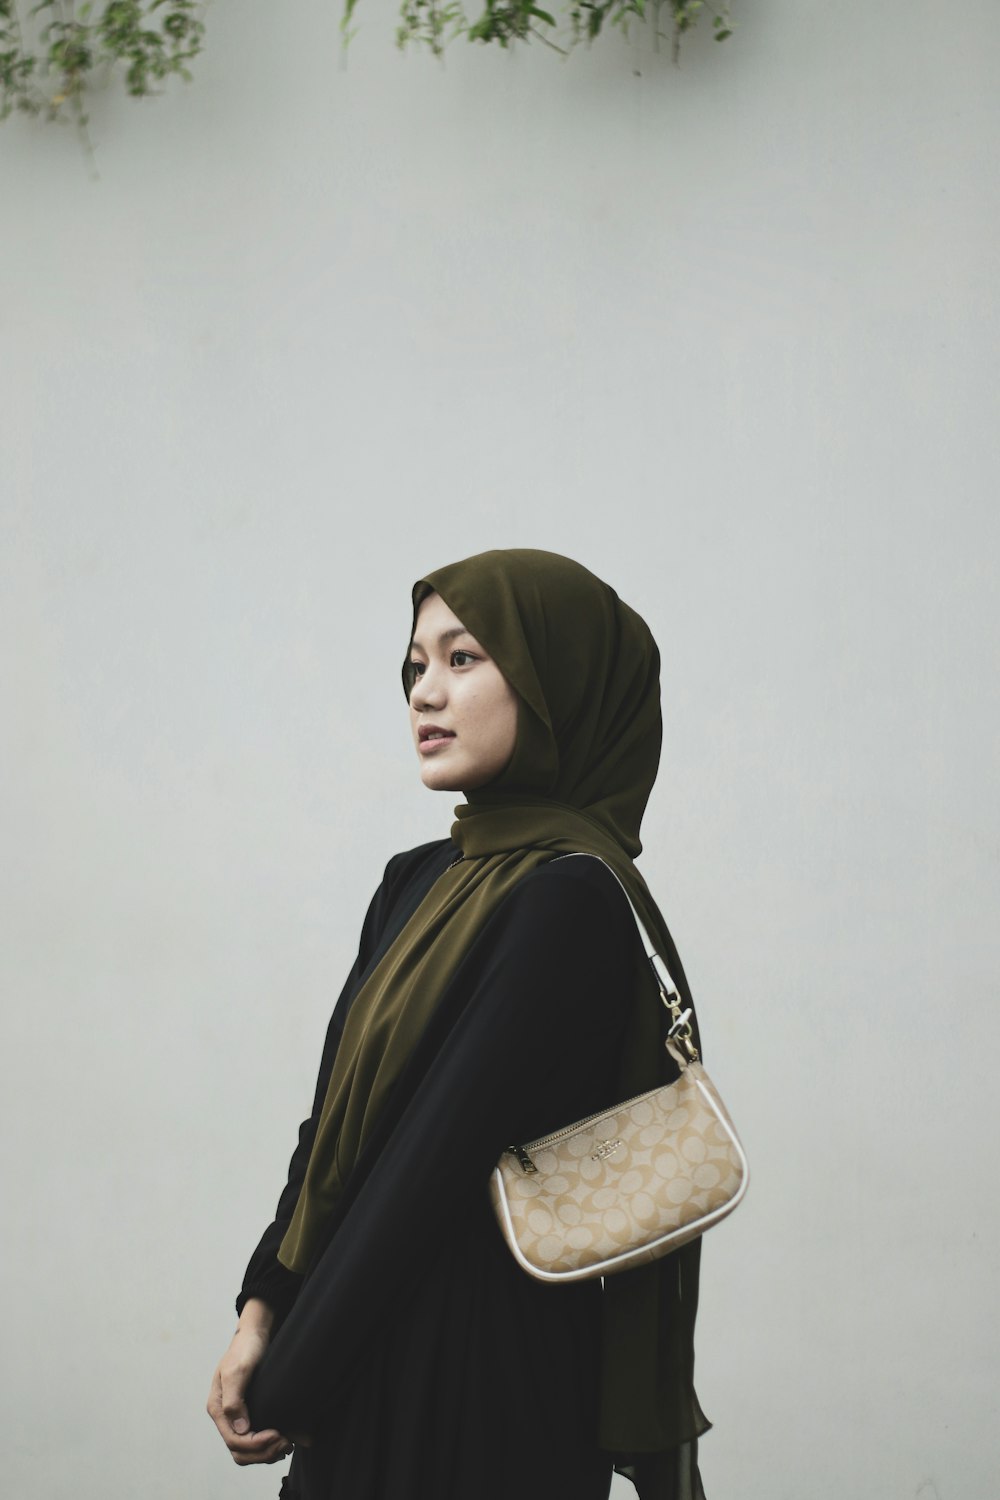 a woman in a hijab carrying a purse